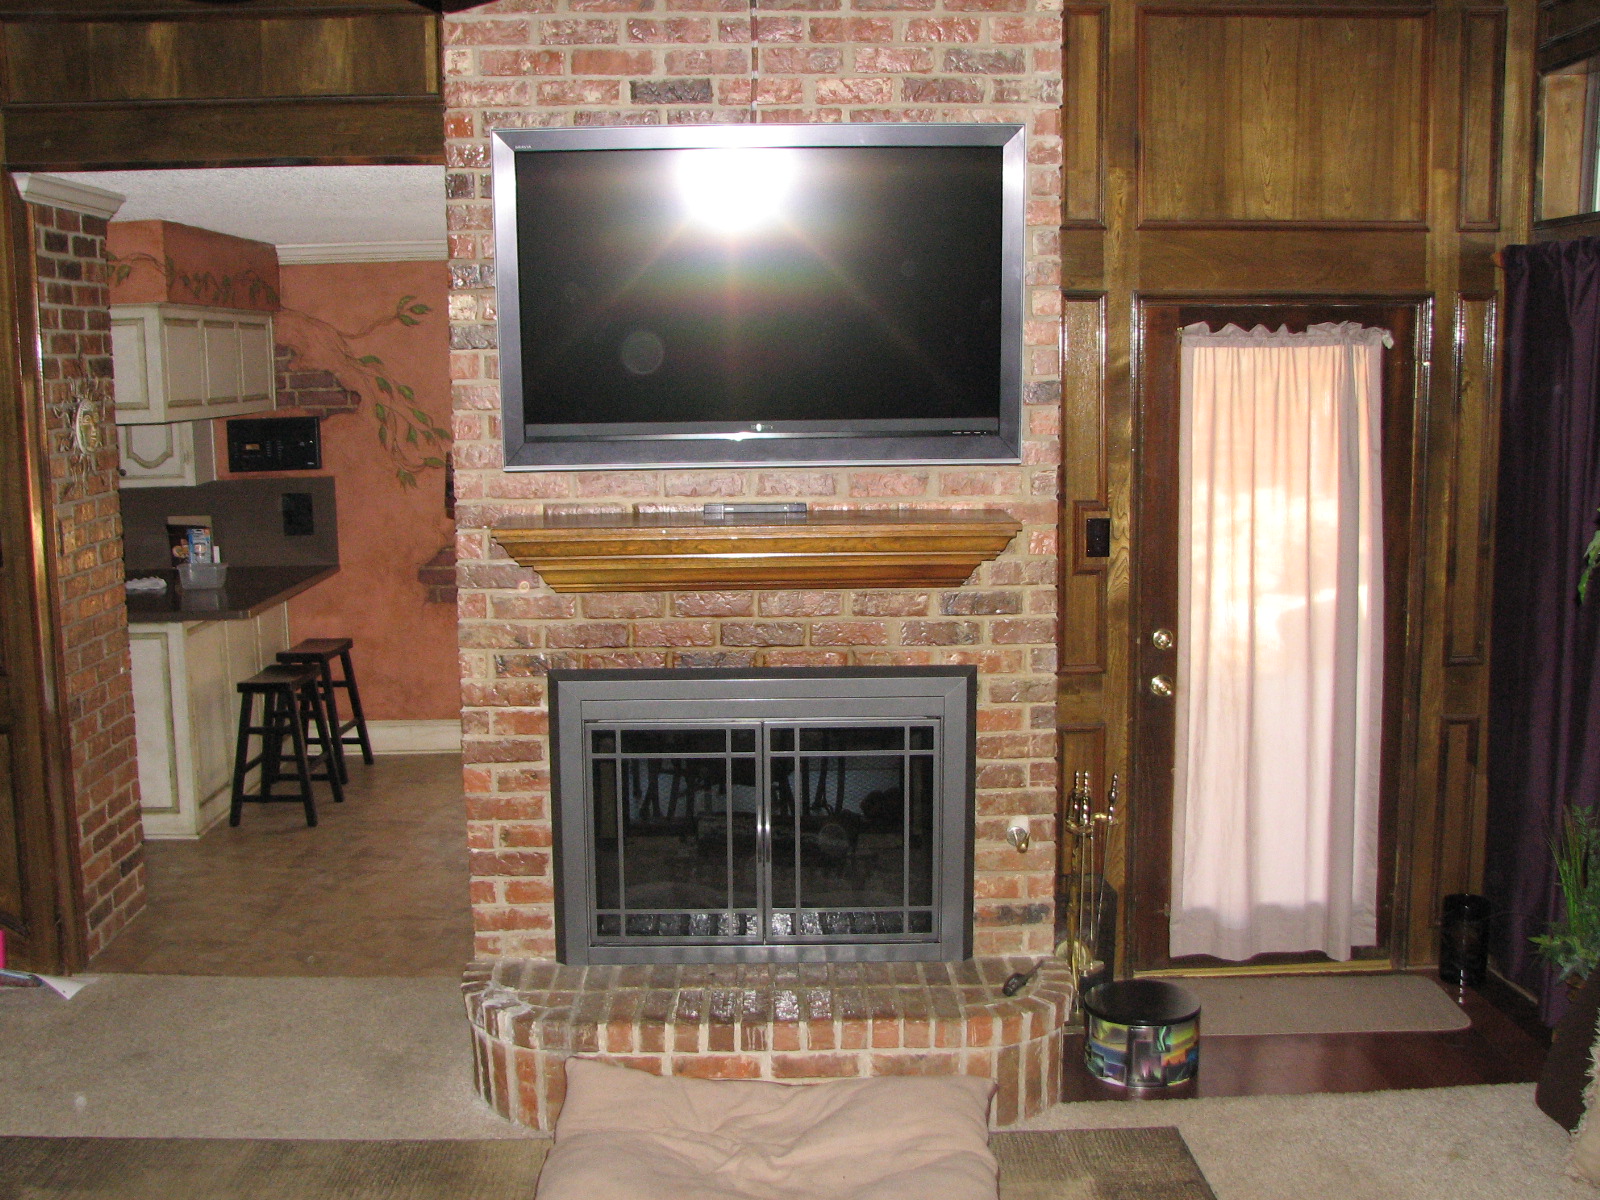 Sony TV mounted installed over brick fireplace Duncanville TX